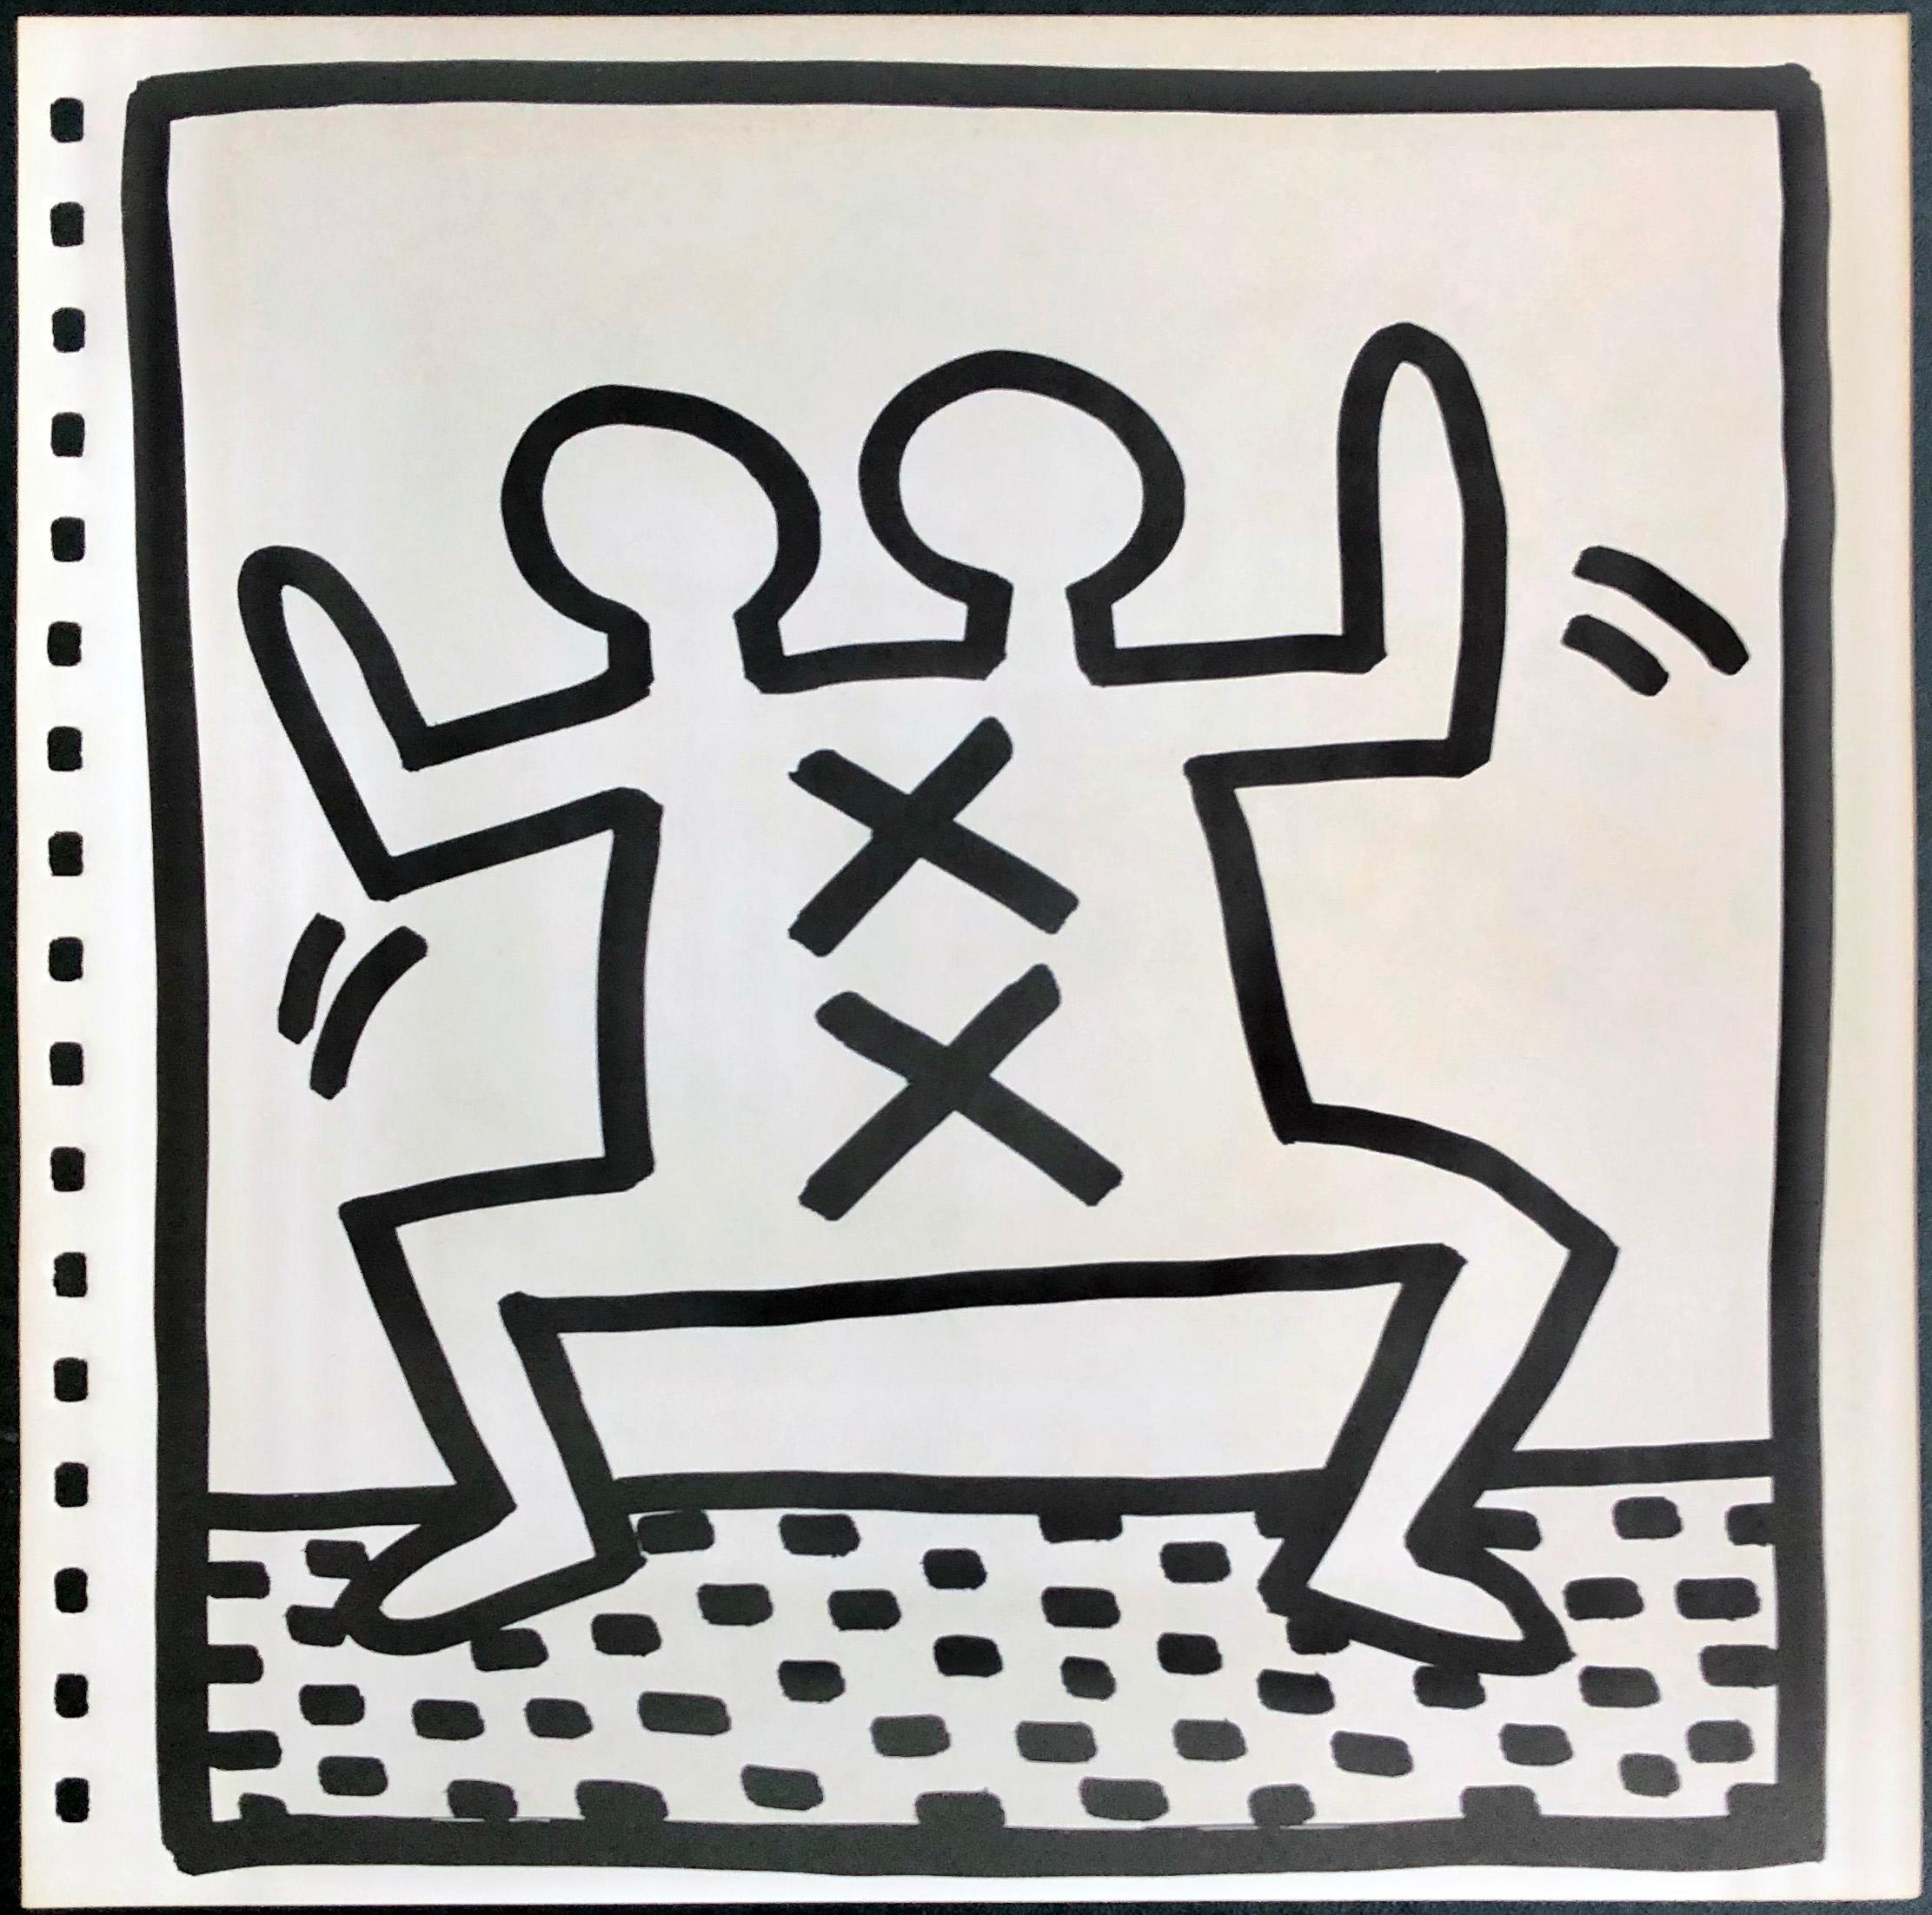 Keith Haring (untitled) spaceship lithograph 1982 (Keith Haring prints)  - Pop Art Print by (after) Keith Haring